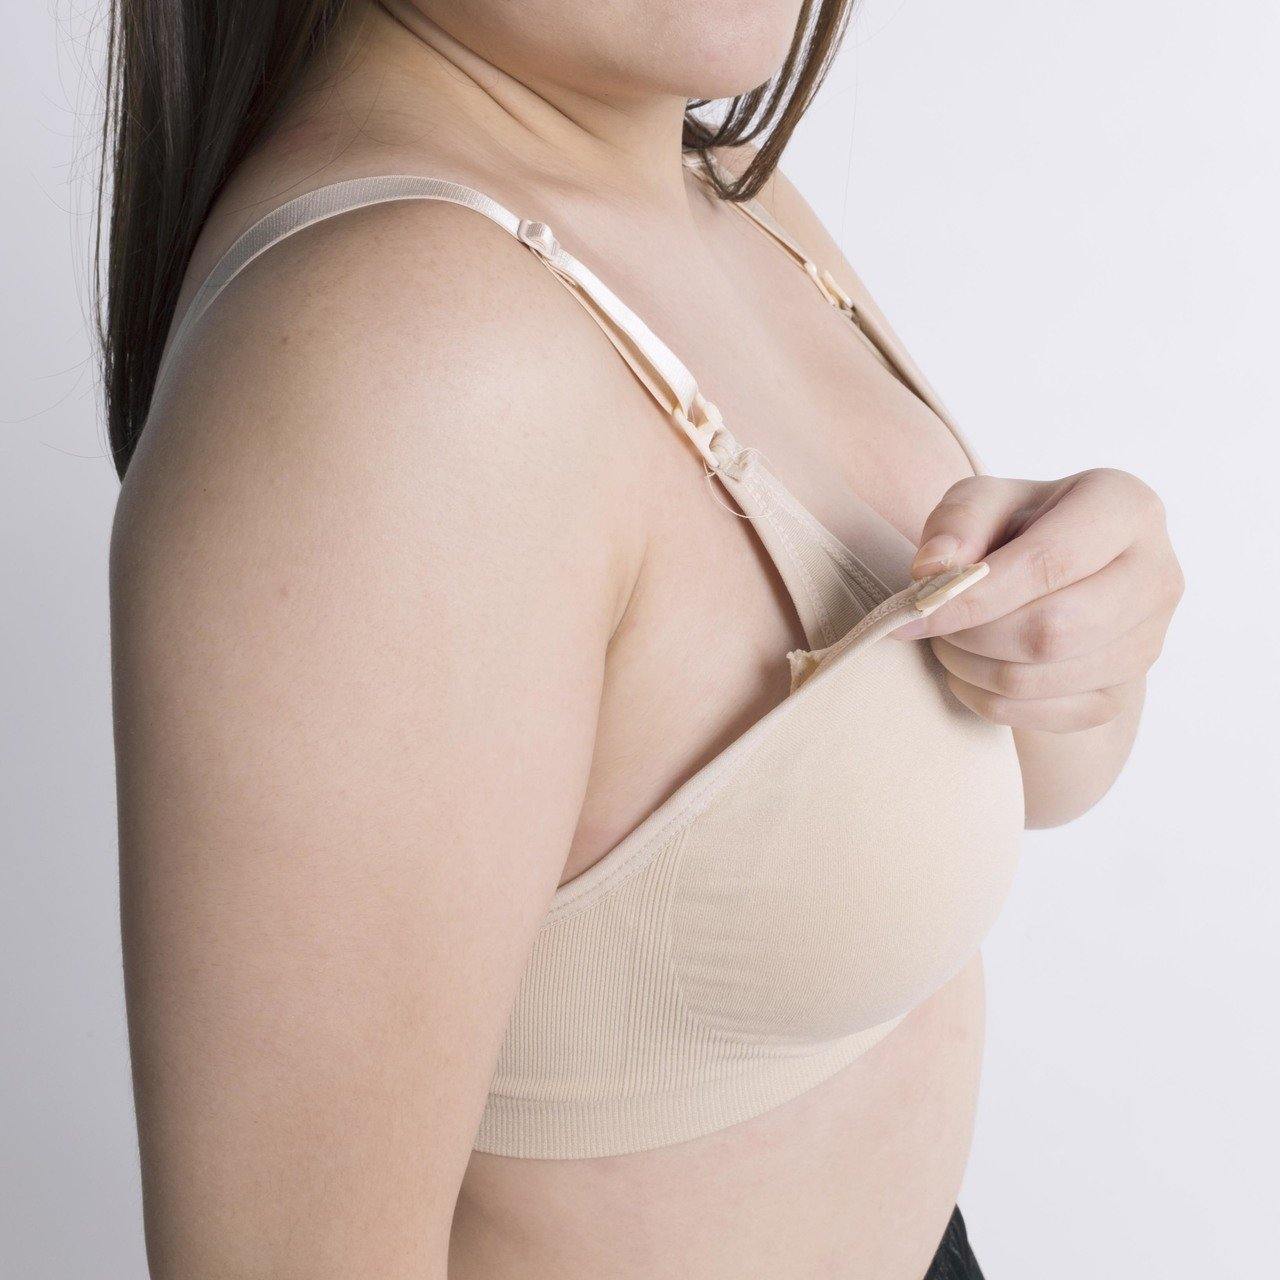 the stay close padded hands free pumping bralette